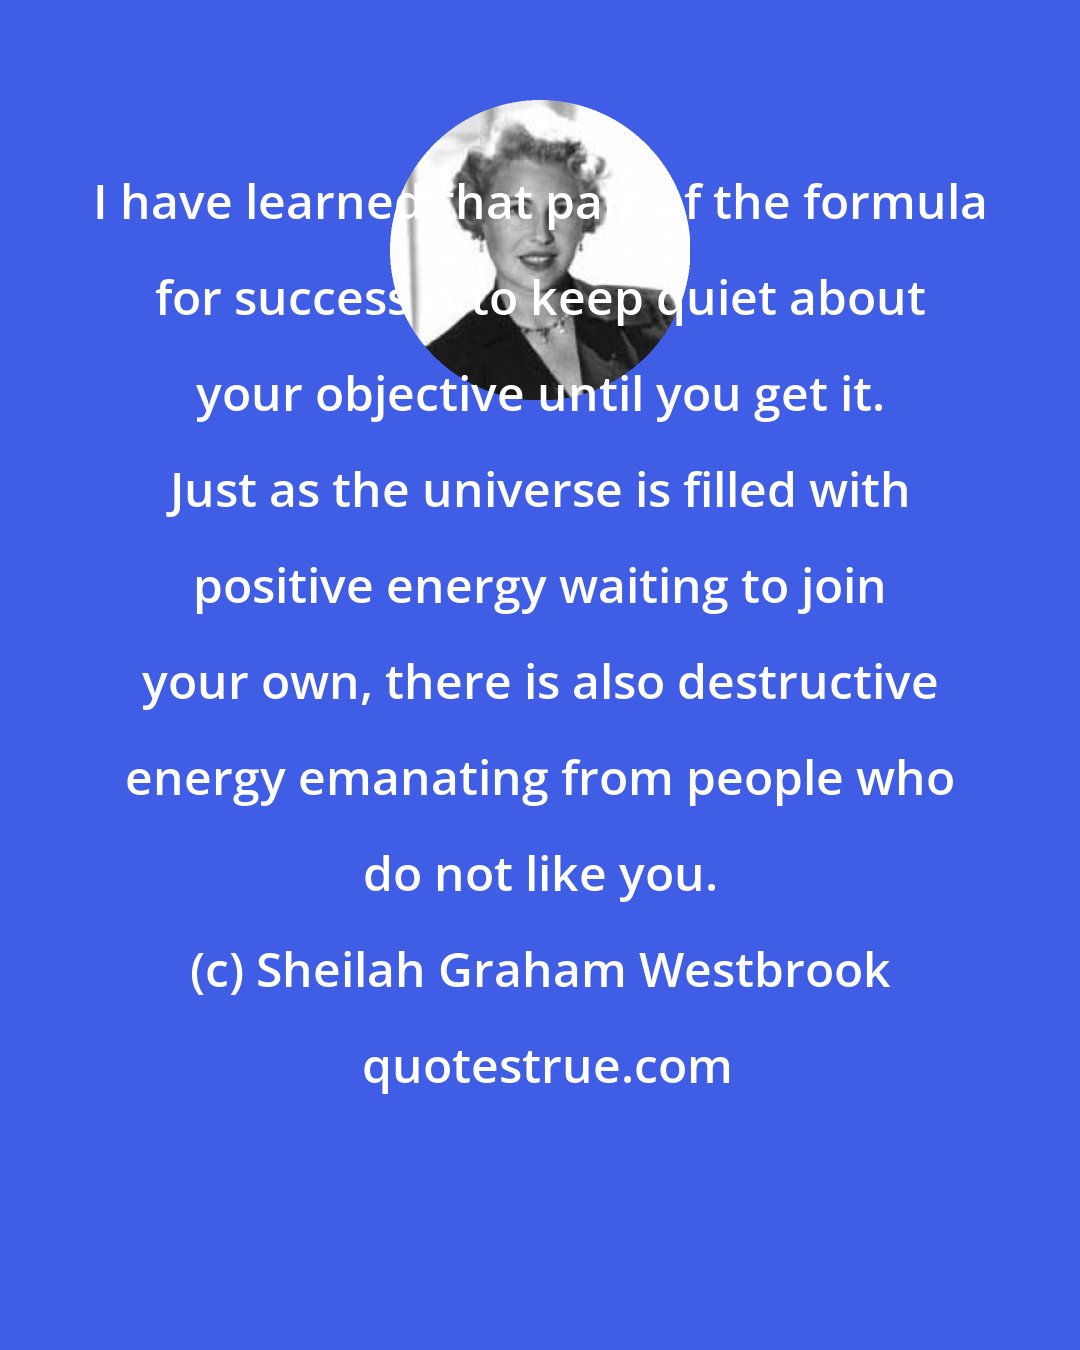 Sheilah Graham Westbrook: I have learned that part of the formula for success is to keep quiet about your objective until you get it. Just as the universe is filled with positive energy waiting to join your own, there is also destructive energy emanating from people who do not like you.